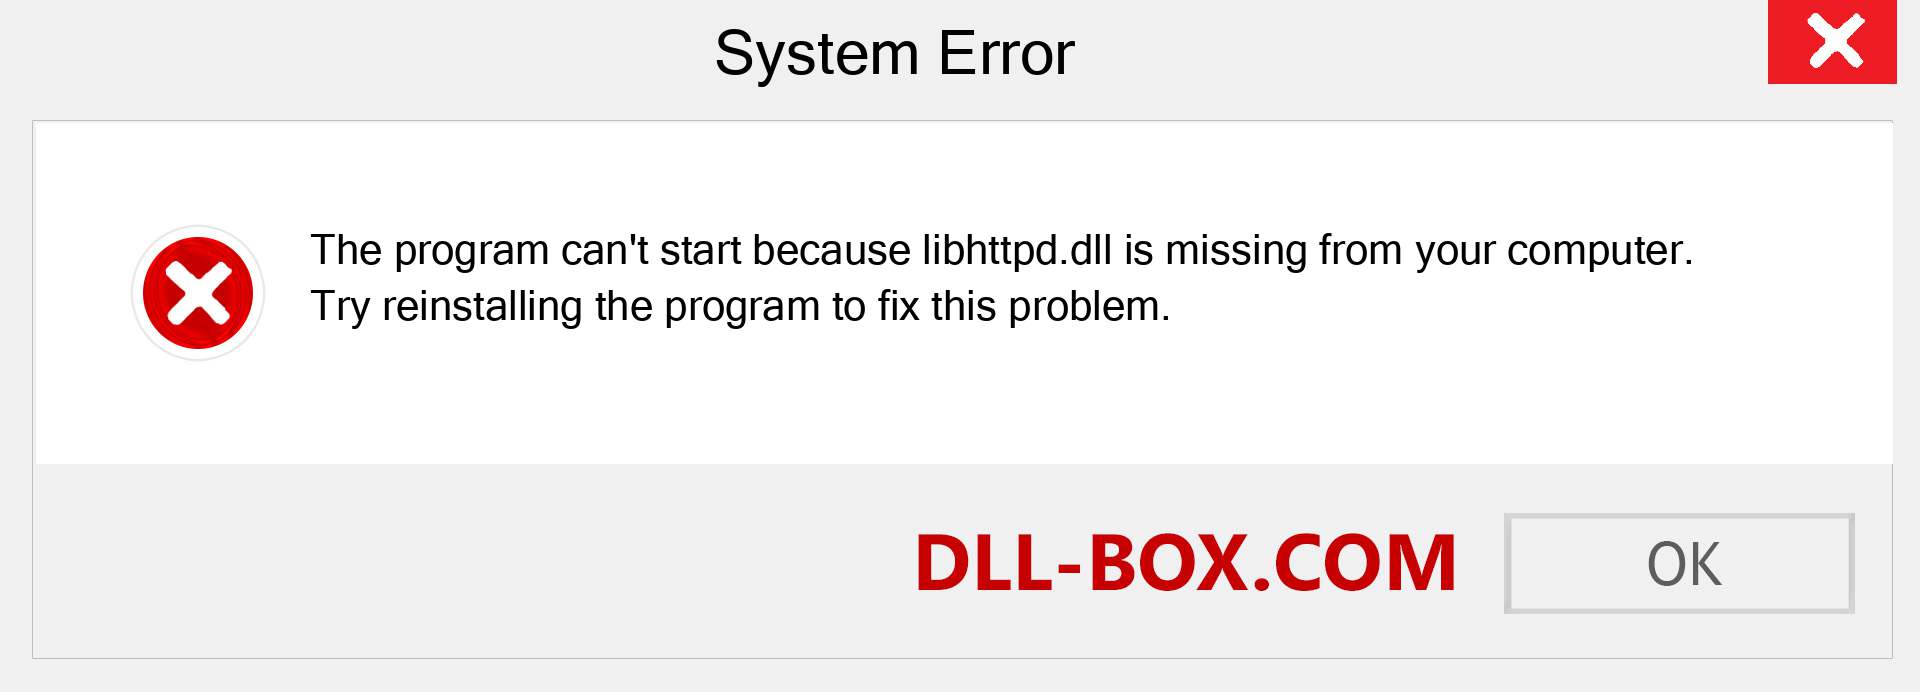  libhttpd.dll file is missing?. Download for Windows 7, 8, 10 - Fix  libhttpd dll Missing Error on Windows, photos, images